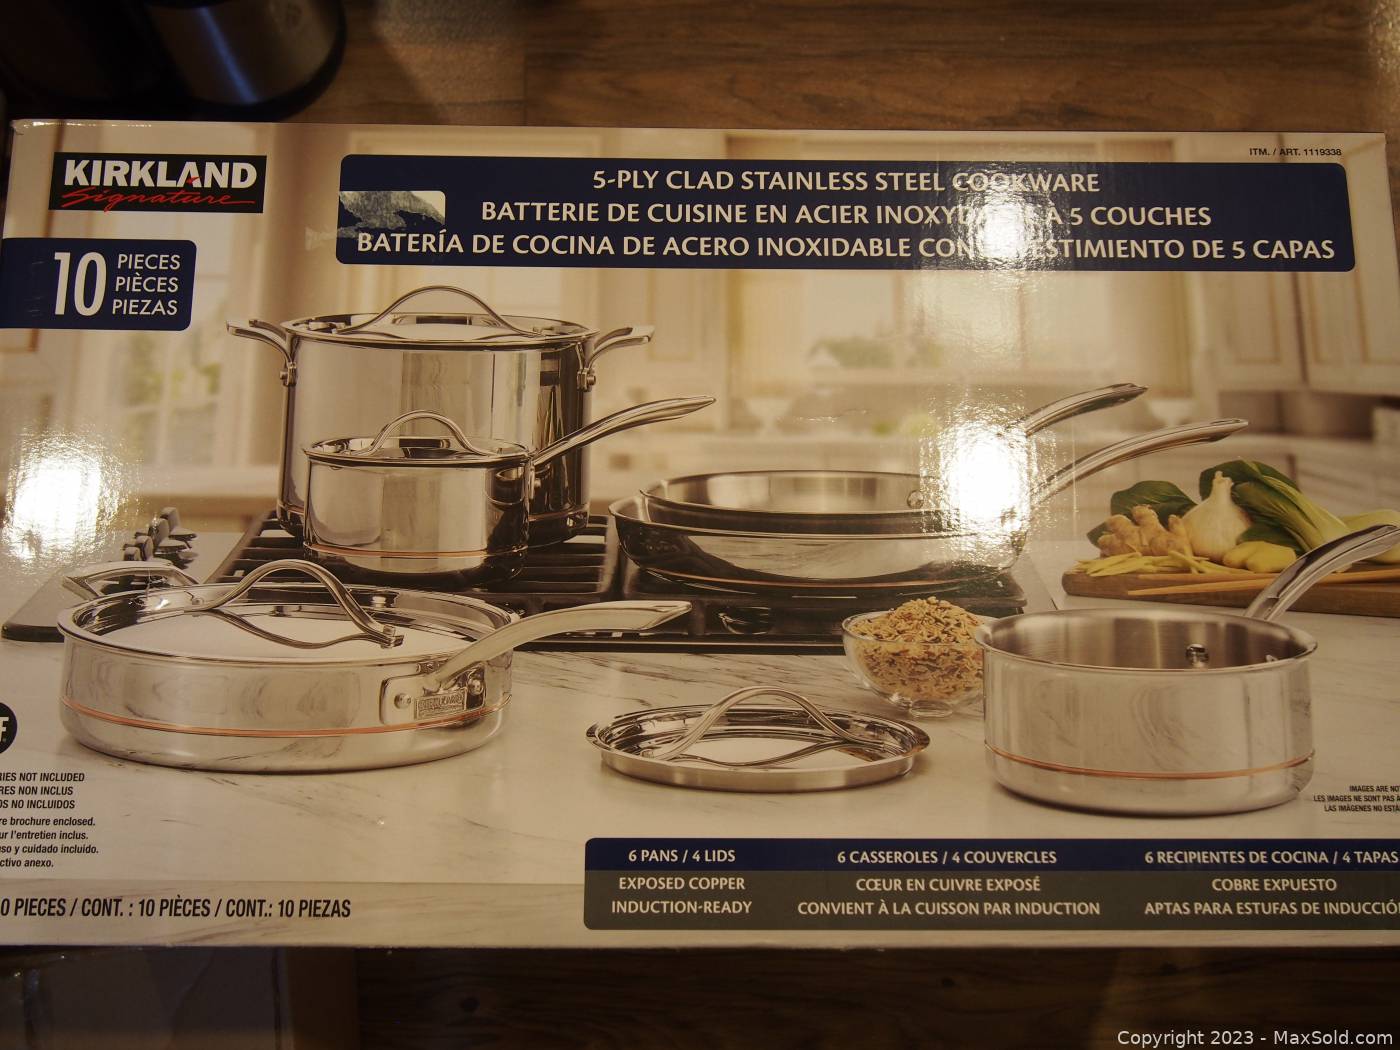 Kirkland 10 pc 5-ply clad Stainless Steel Cookware